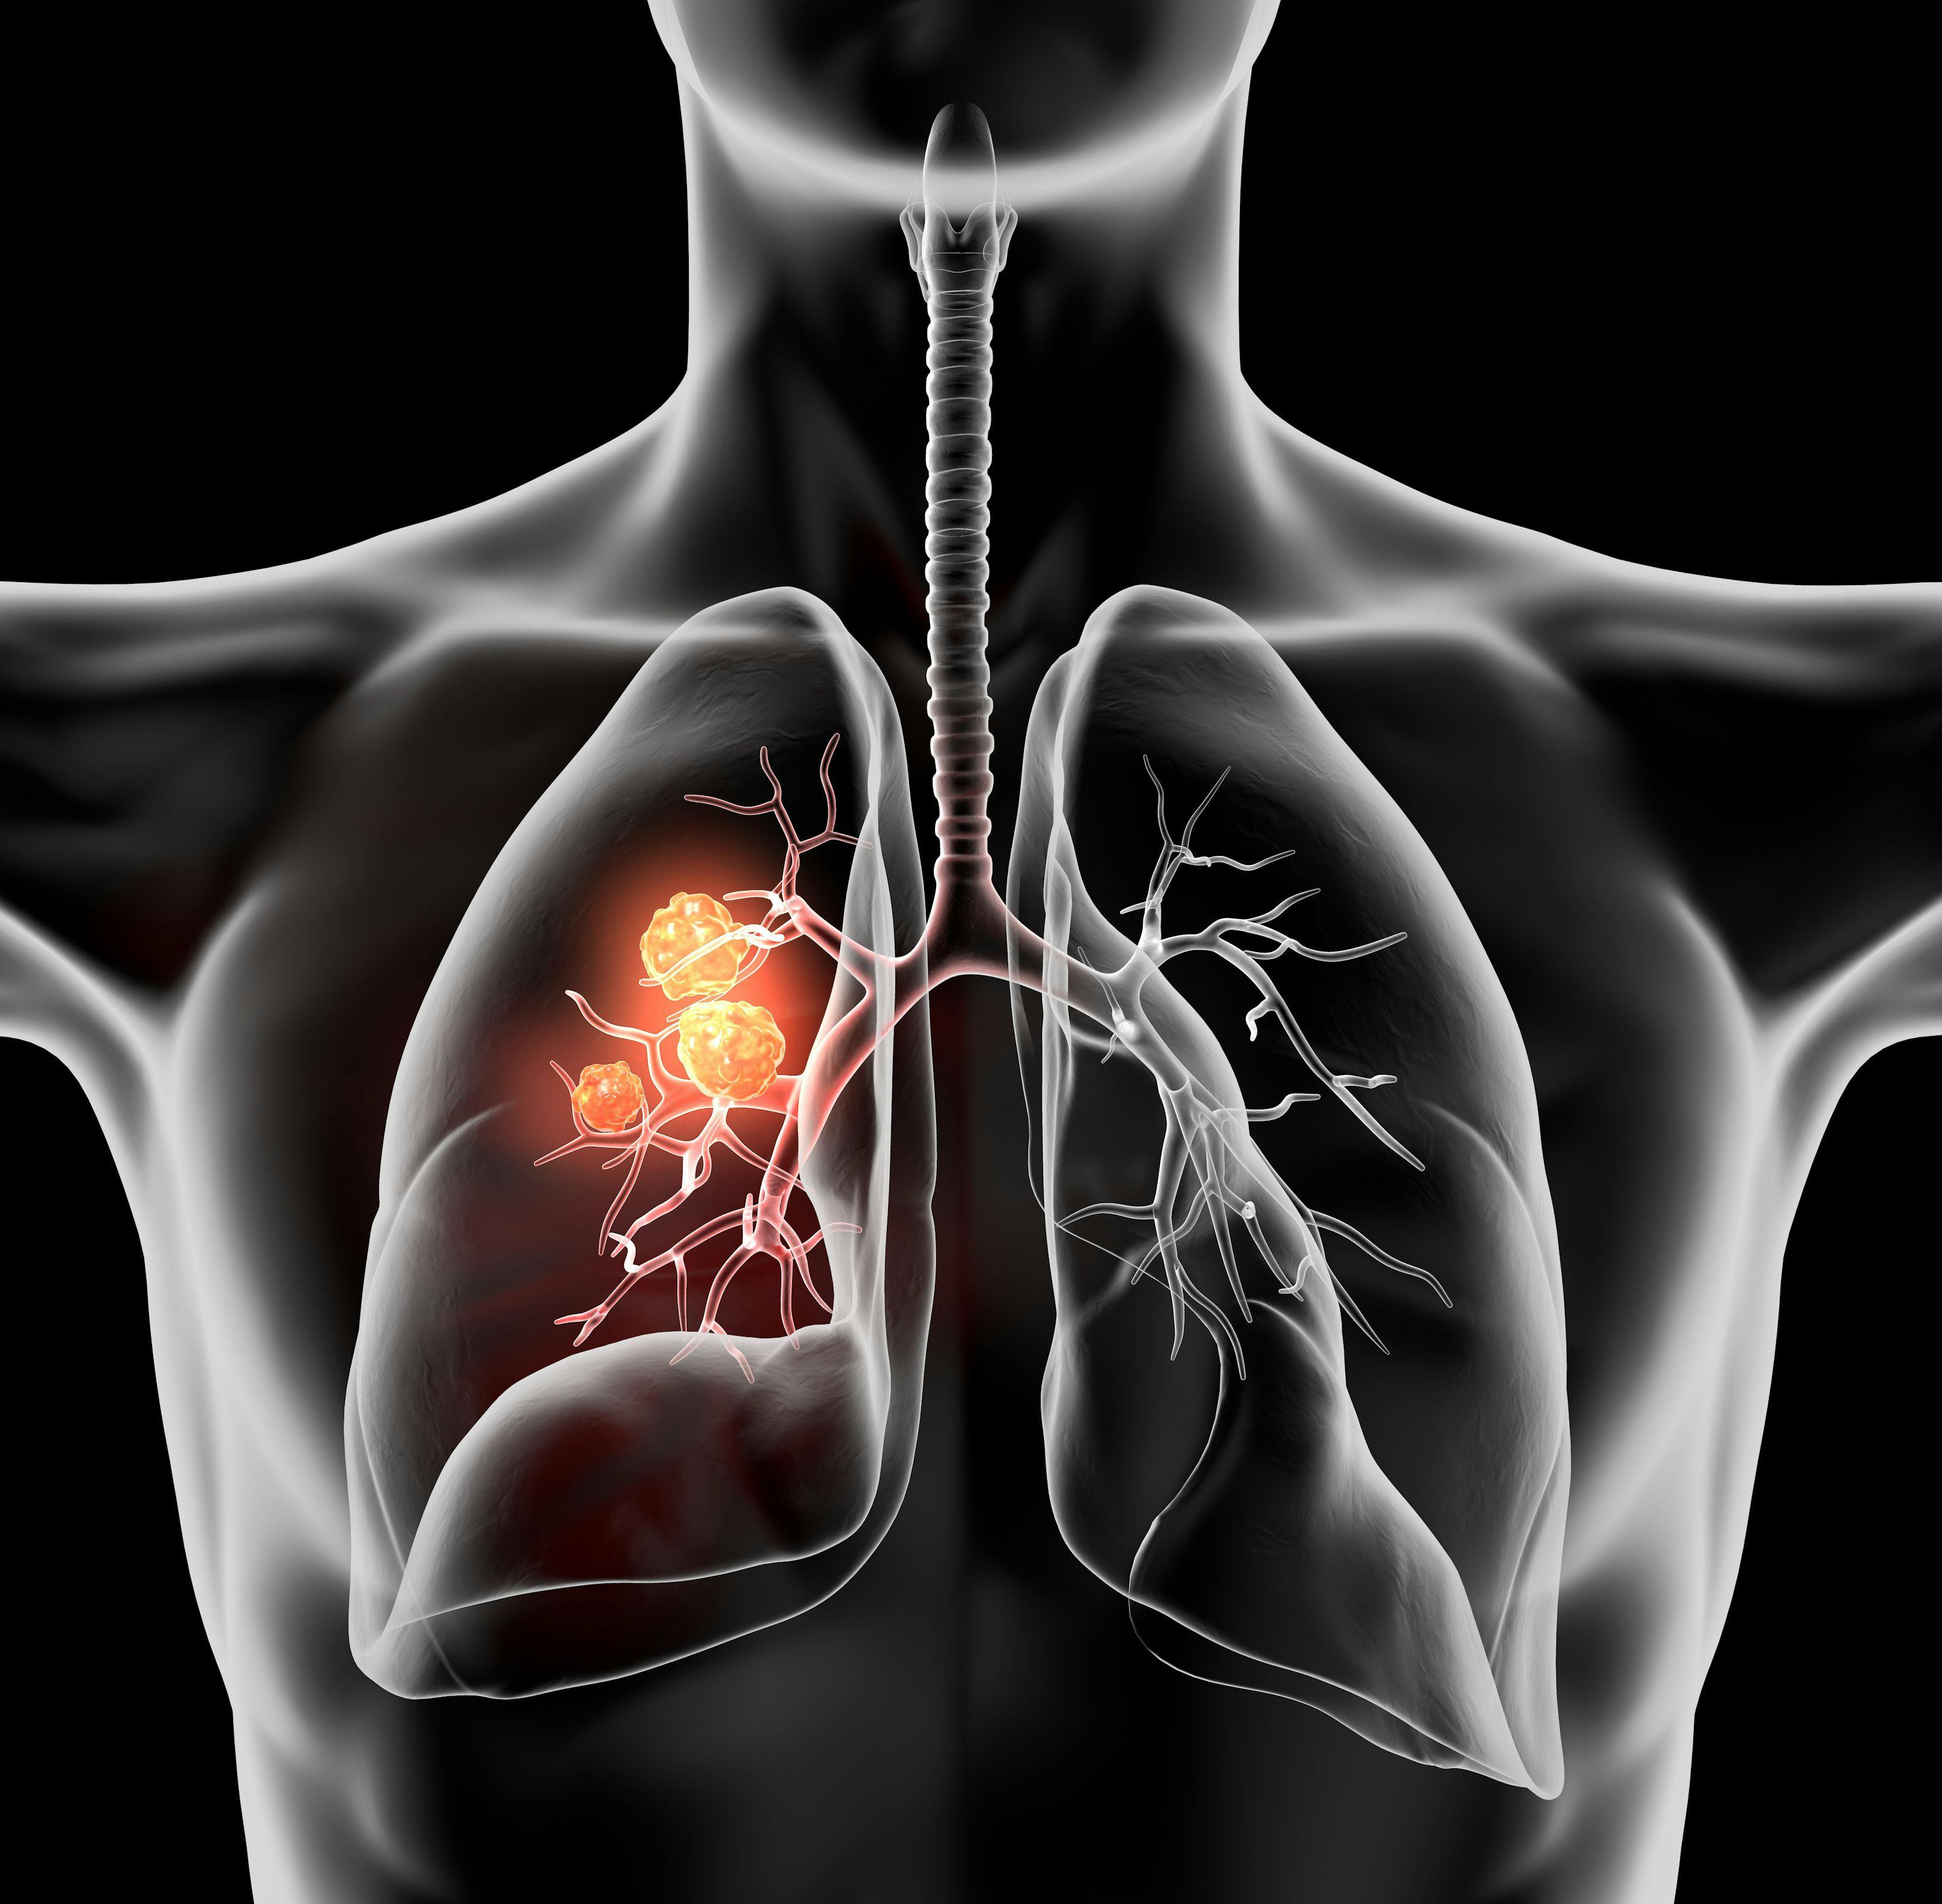  Durvalumab Plus Chemotherapy Yields Statistically Significant Responses in Resectable NSCLC